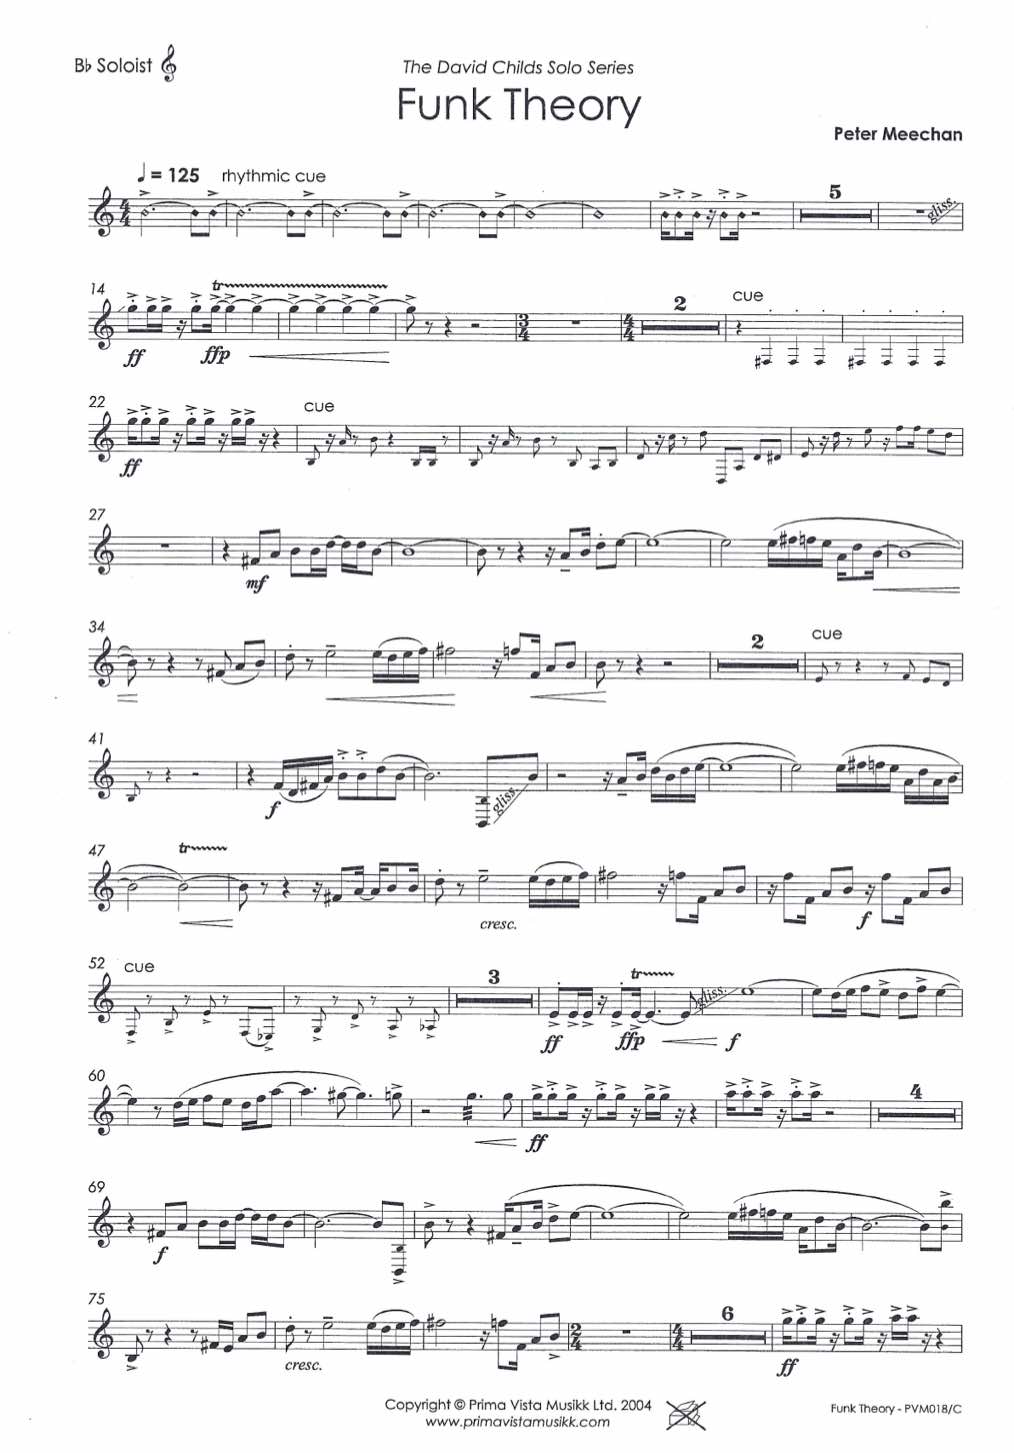 Town of Salem Day Music (Piano solo) Sheet music for Piano (Solo